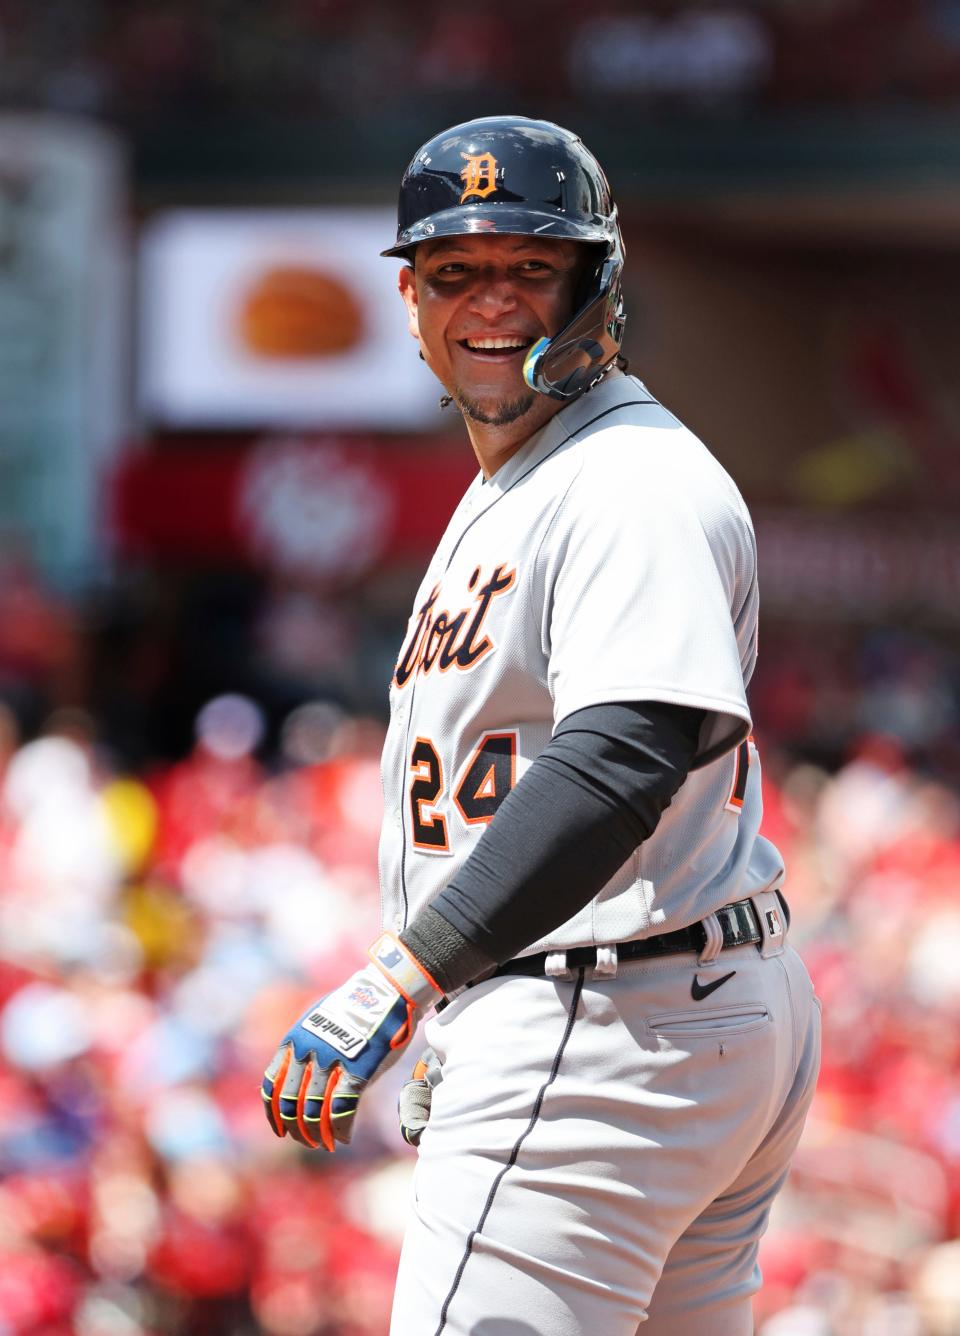 Detroit Tigers' Miguel Cabrera smiles back at first base coach Alfredo Amezaga in the sixth inning of a baseball game against the St. Louis Cardinals at Busch Stadium in St. Louis on Sunday, May 7, 2023.